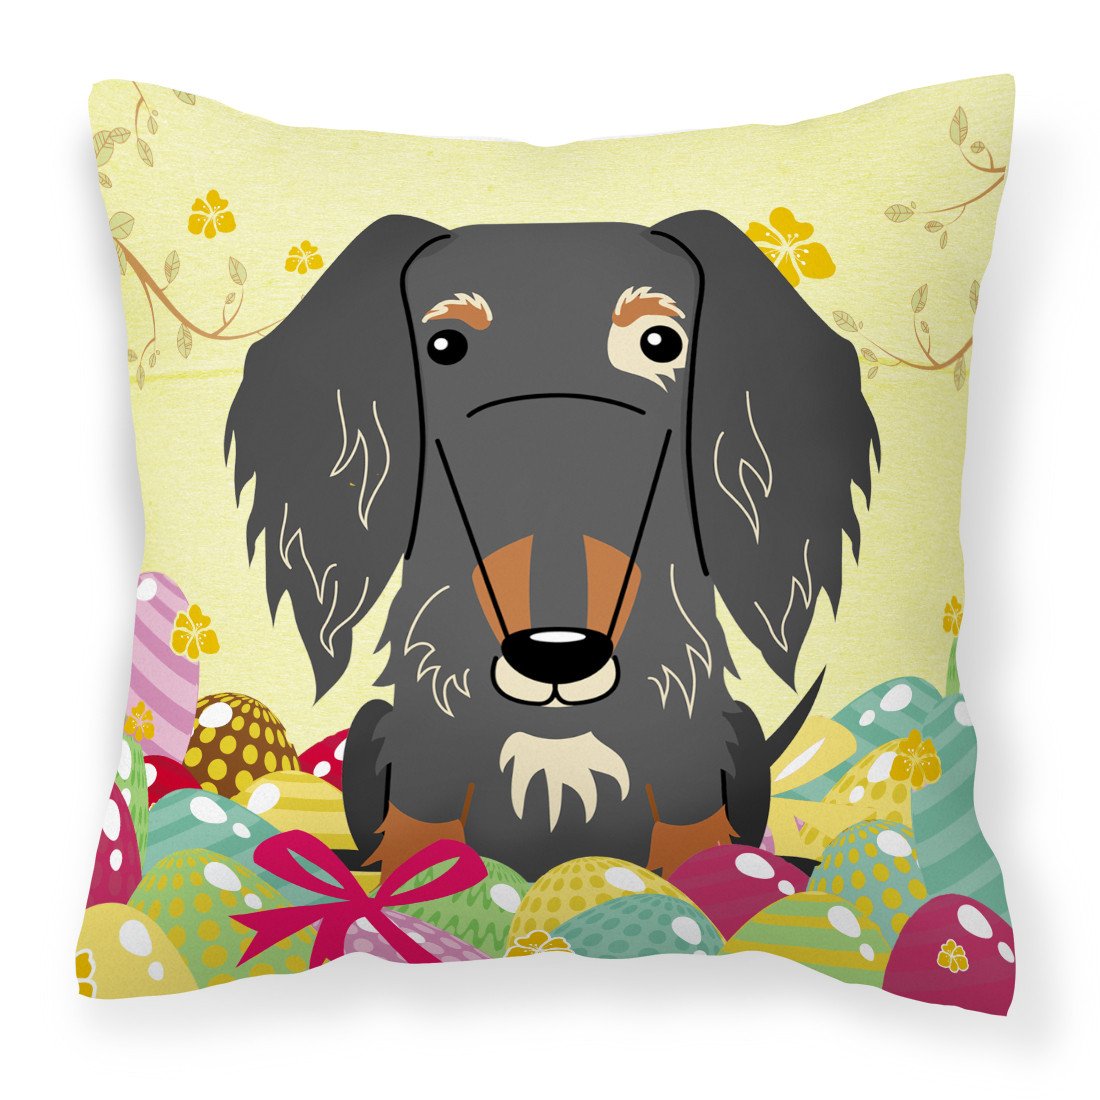 Easter Eggs Wire Haired Dachshund Dapple Fabric Decorative Pillow BB6128PW1818 by Caroline's Treasures